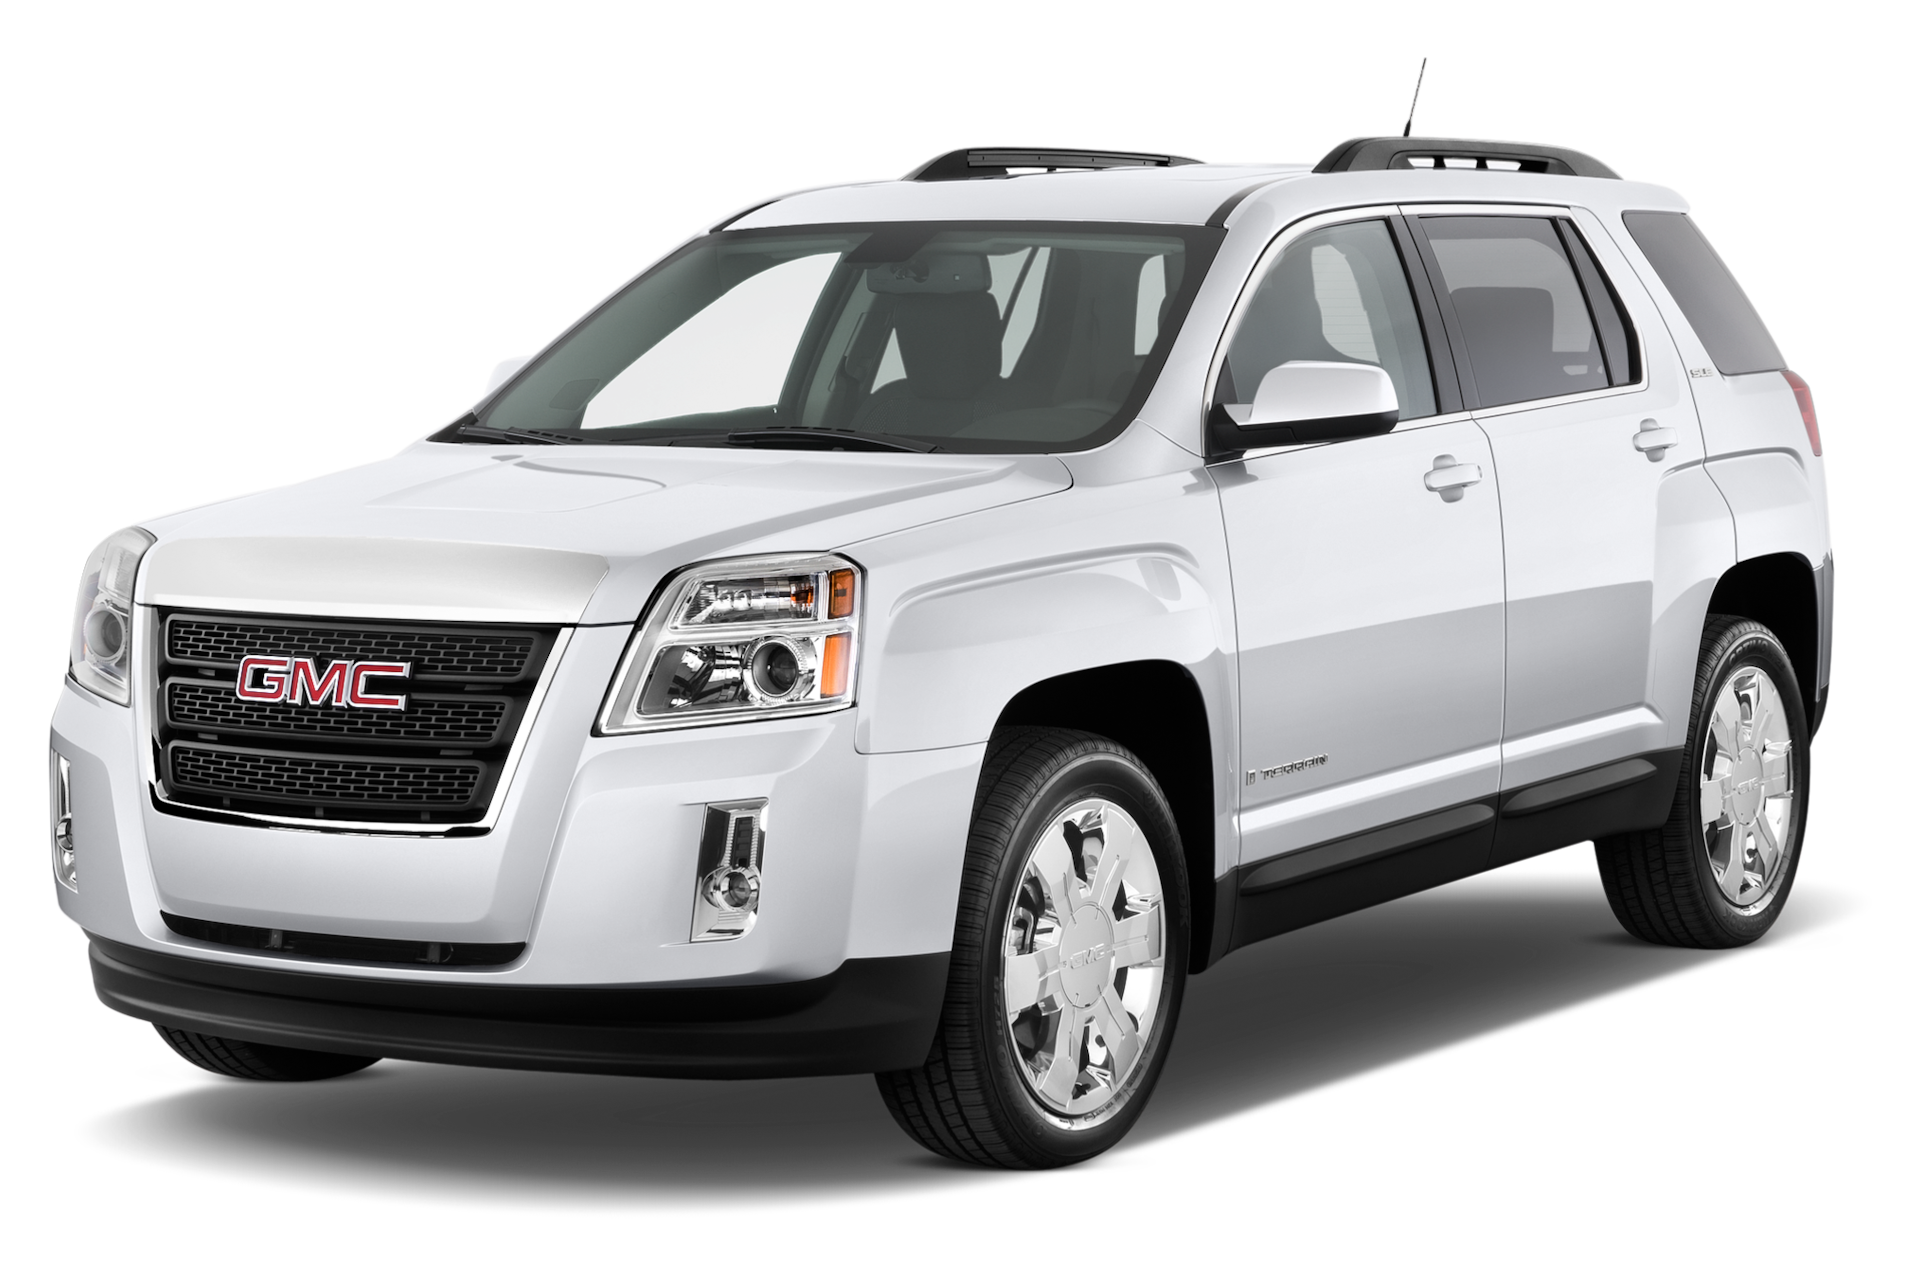 2012 GMC Terrain Prices, Reviews, and Photos - MotorTrend